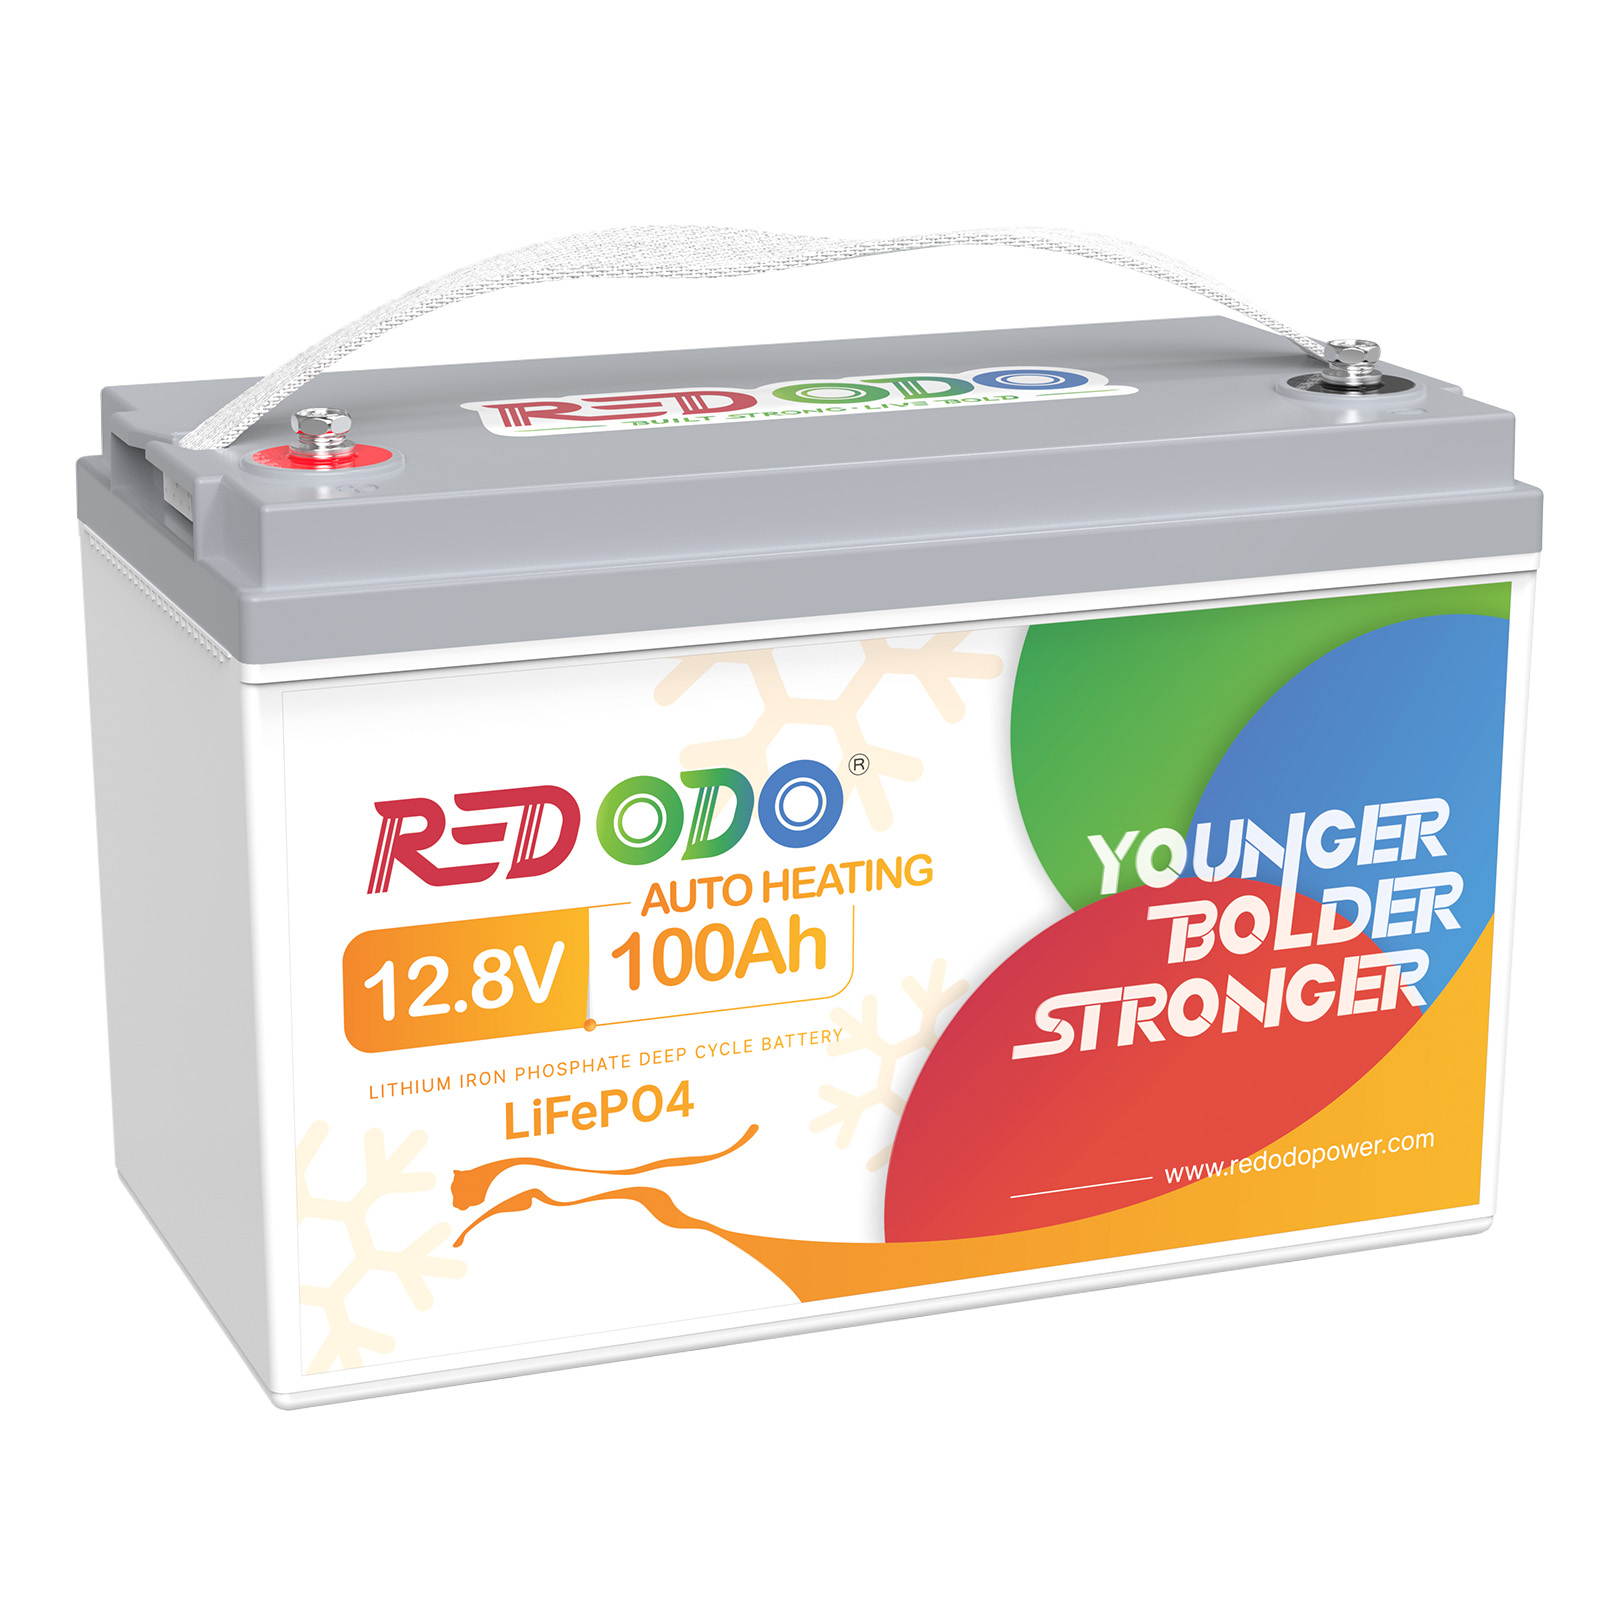 Redodo 12V 100Ah LiFePO4 Battery With Self-Heating, Built-in 100A BMS.jpg__PID:d94cb656-5910-4923-8262-1dab185e07ca